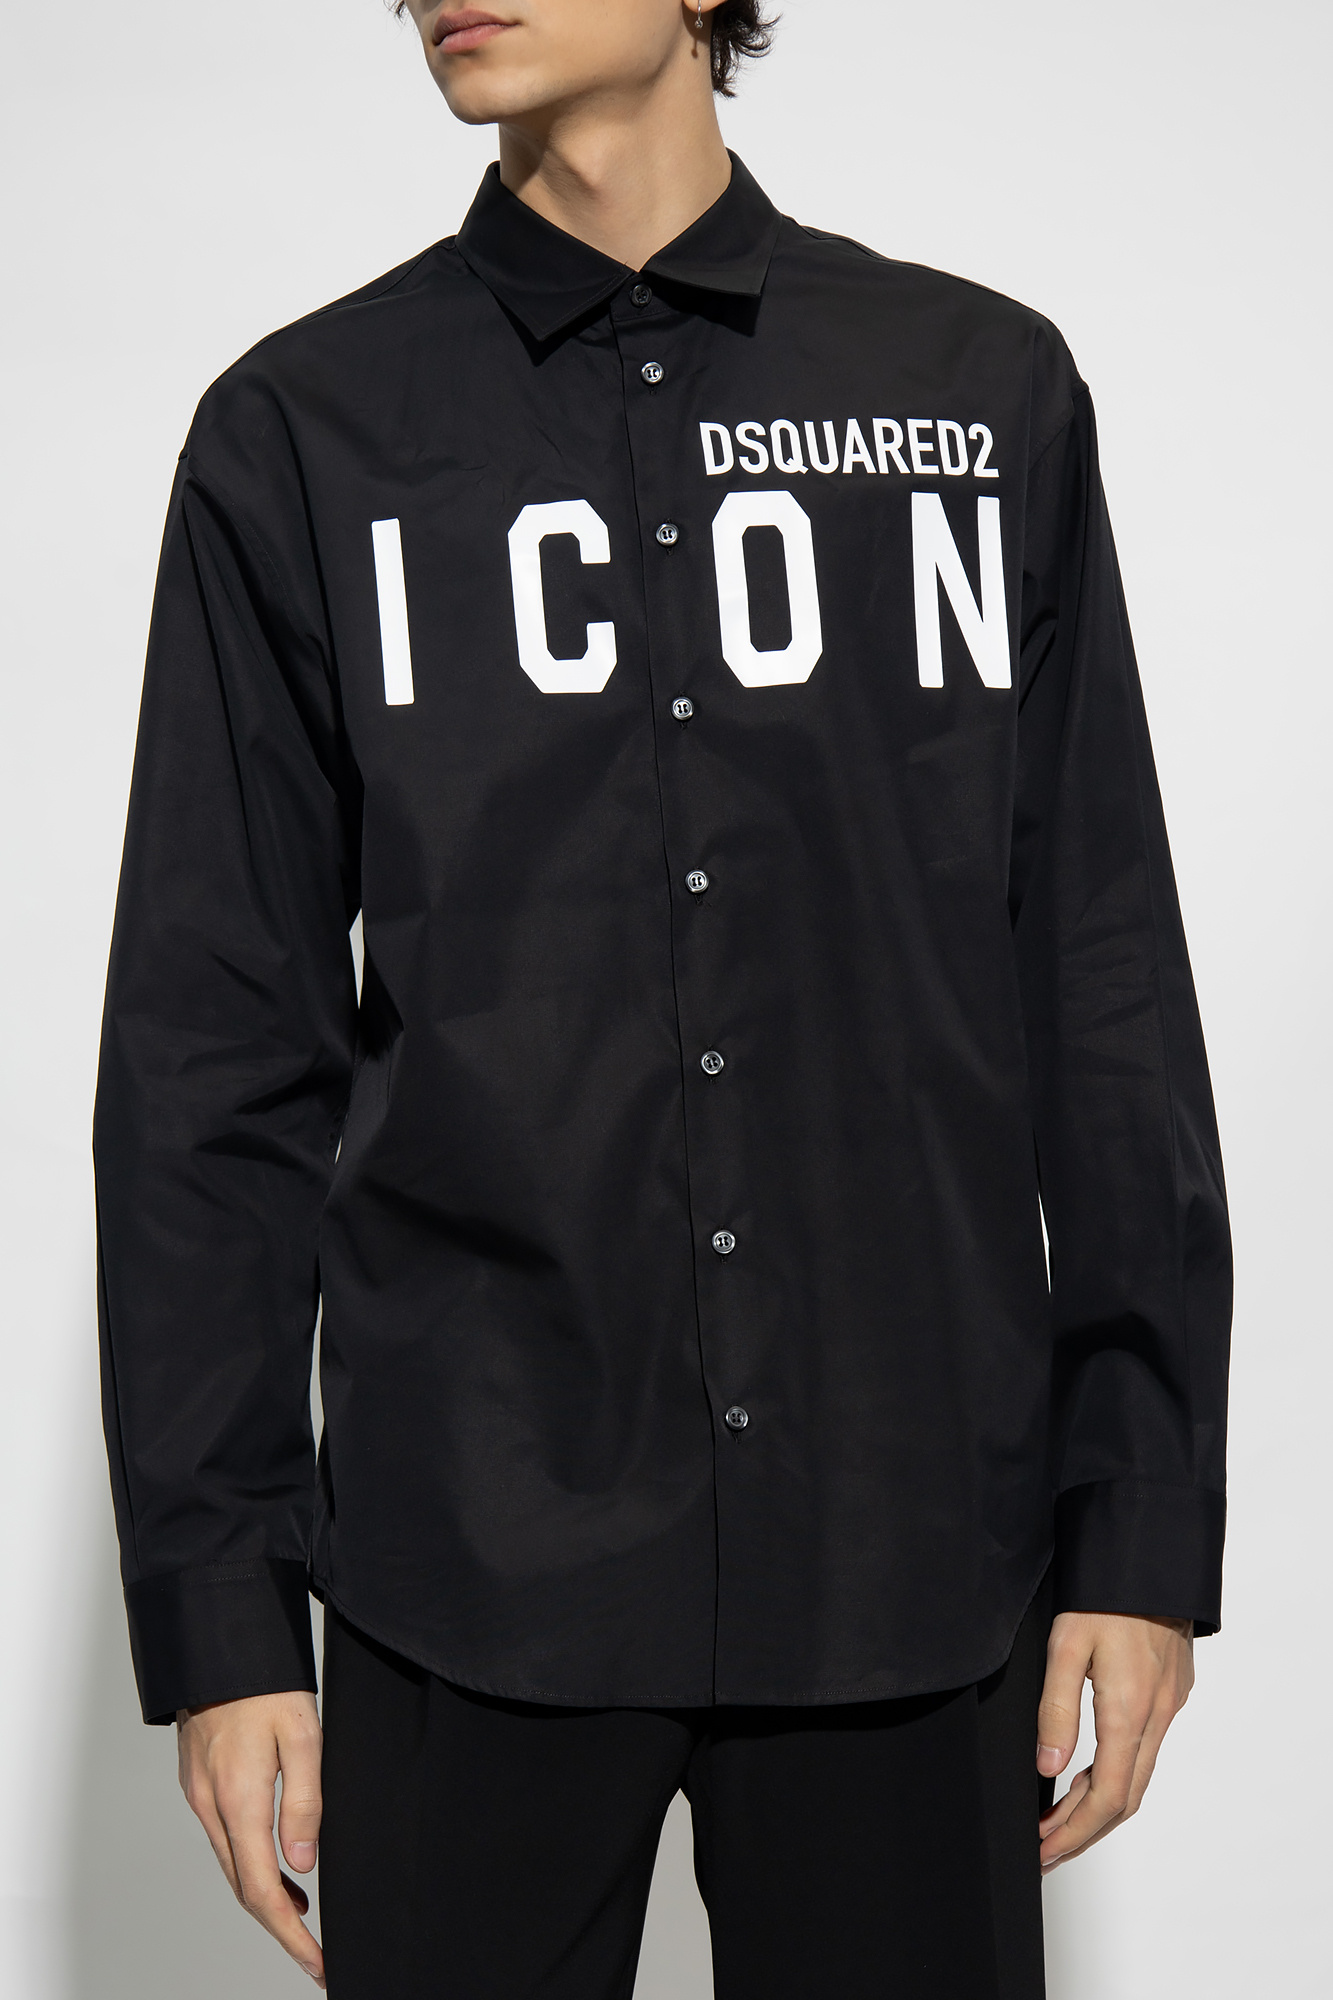 Shirt Ralph Dsquared2 - Black ION Neo Top 0.5 Long Sleeve T - relaxed-fit  boat-neck pullover - GenesinlifeShops Japan